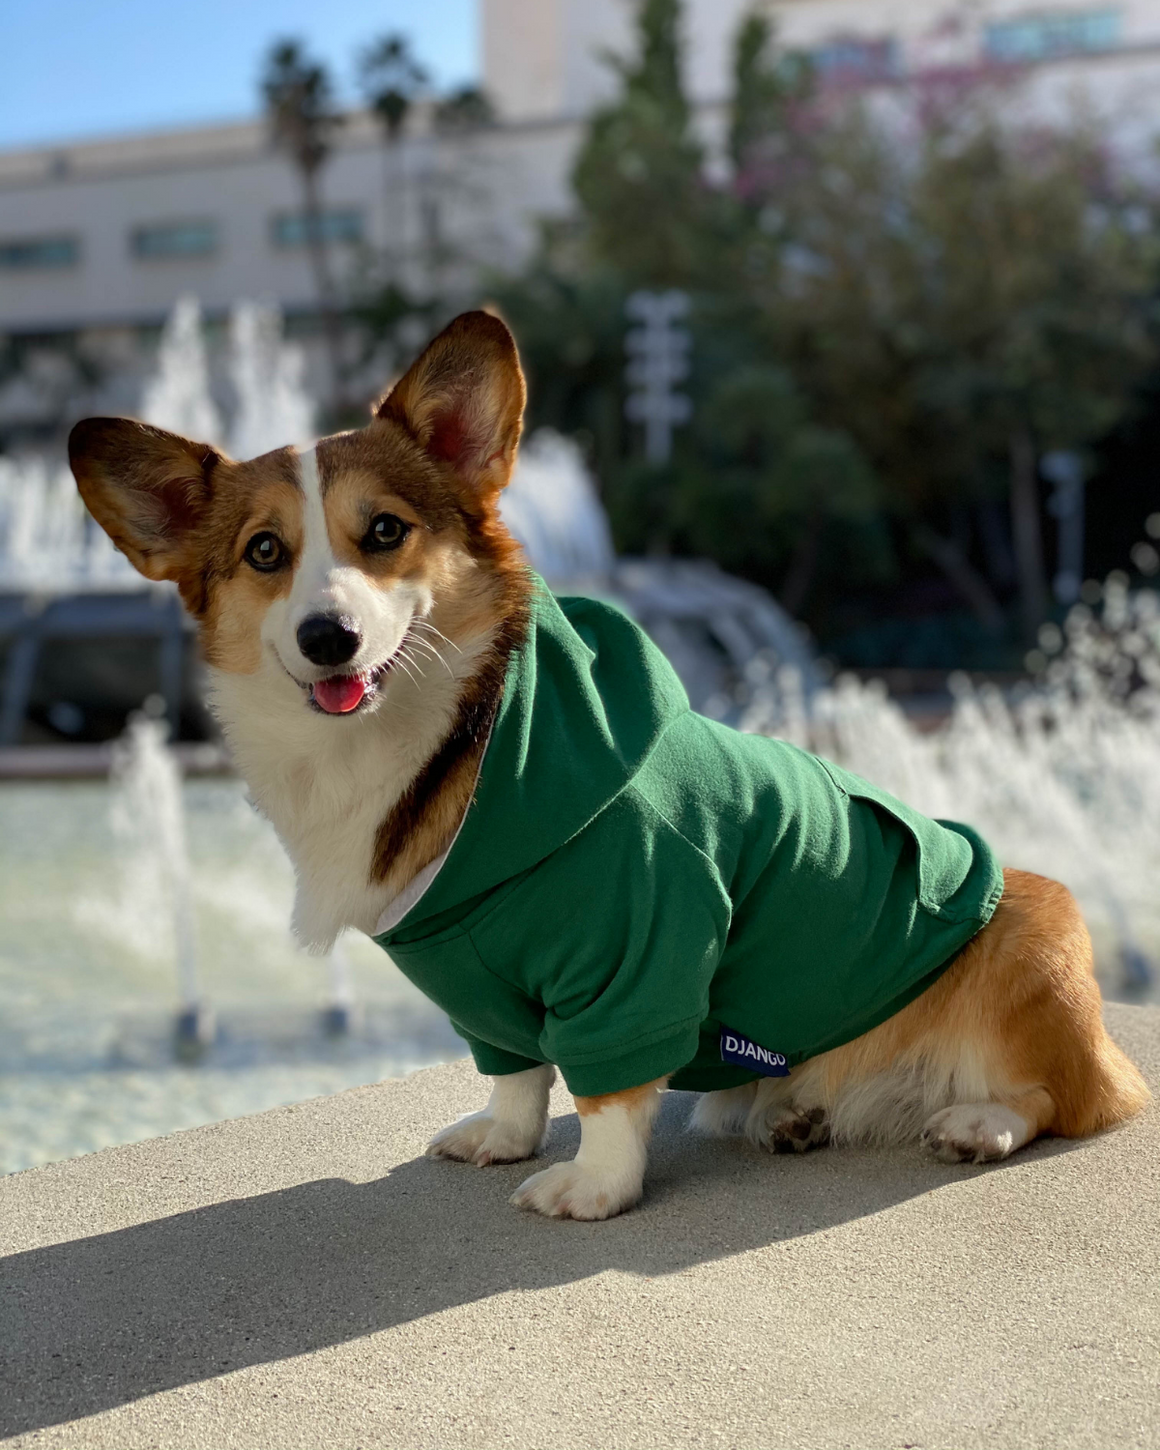 DJANGO Dog Hoodie in Forest Green - Super soft and stretchy dog hoodies and sweaters - djangobrand.com